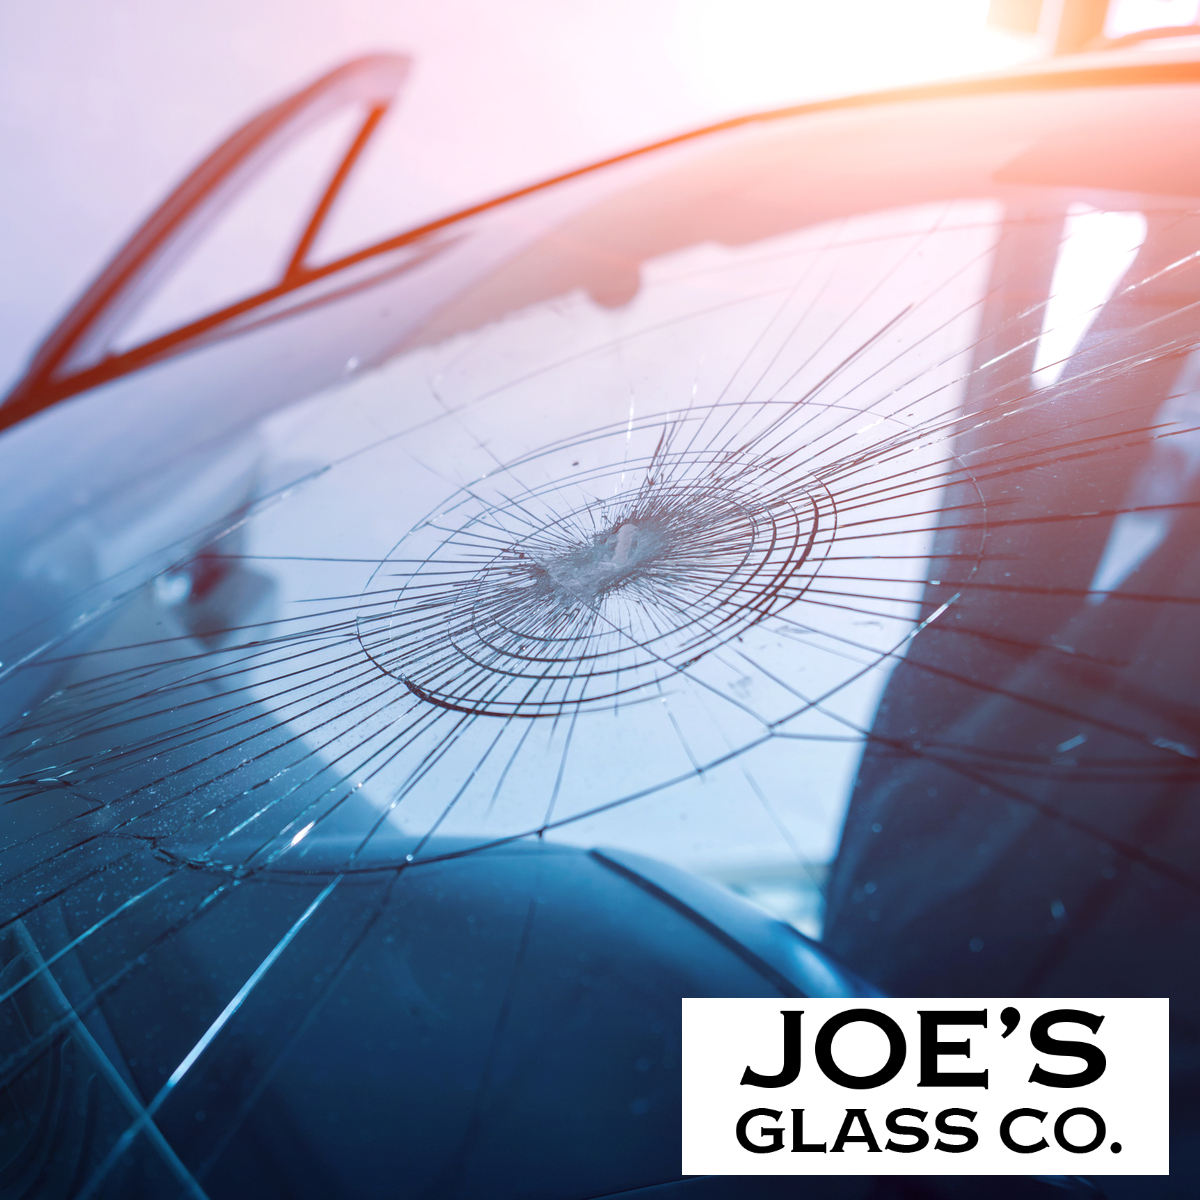 Joe’s Glass Co. is a Specialist in Large 1 Piece Windshield Installation and Repairs!